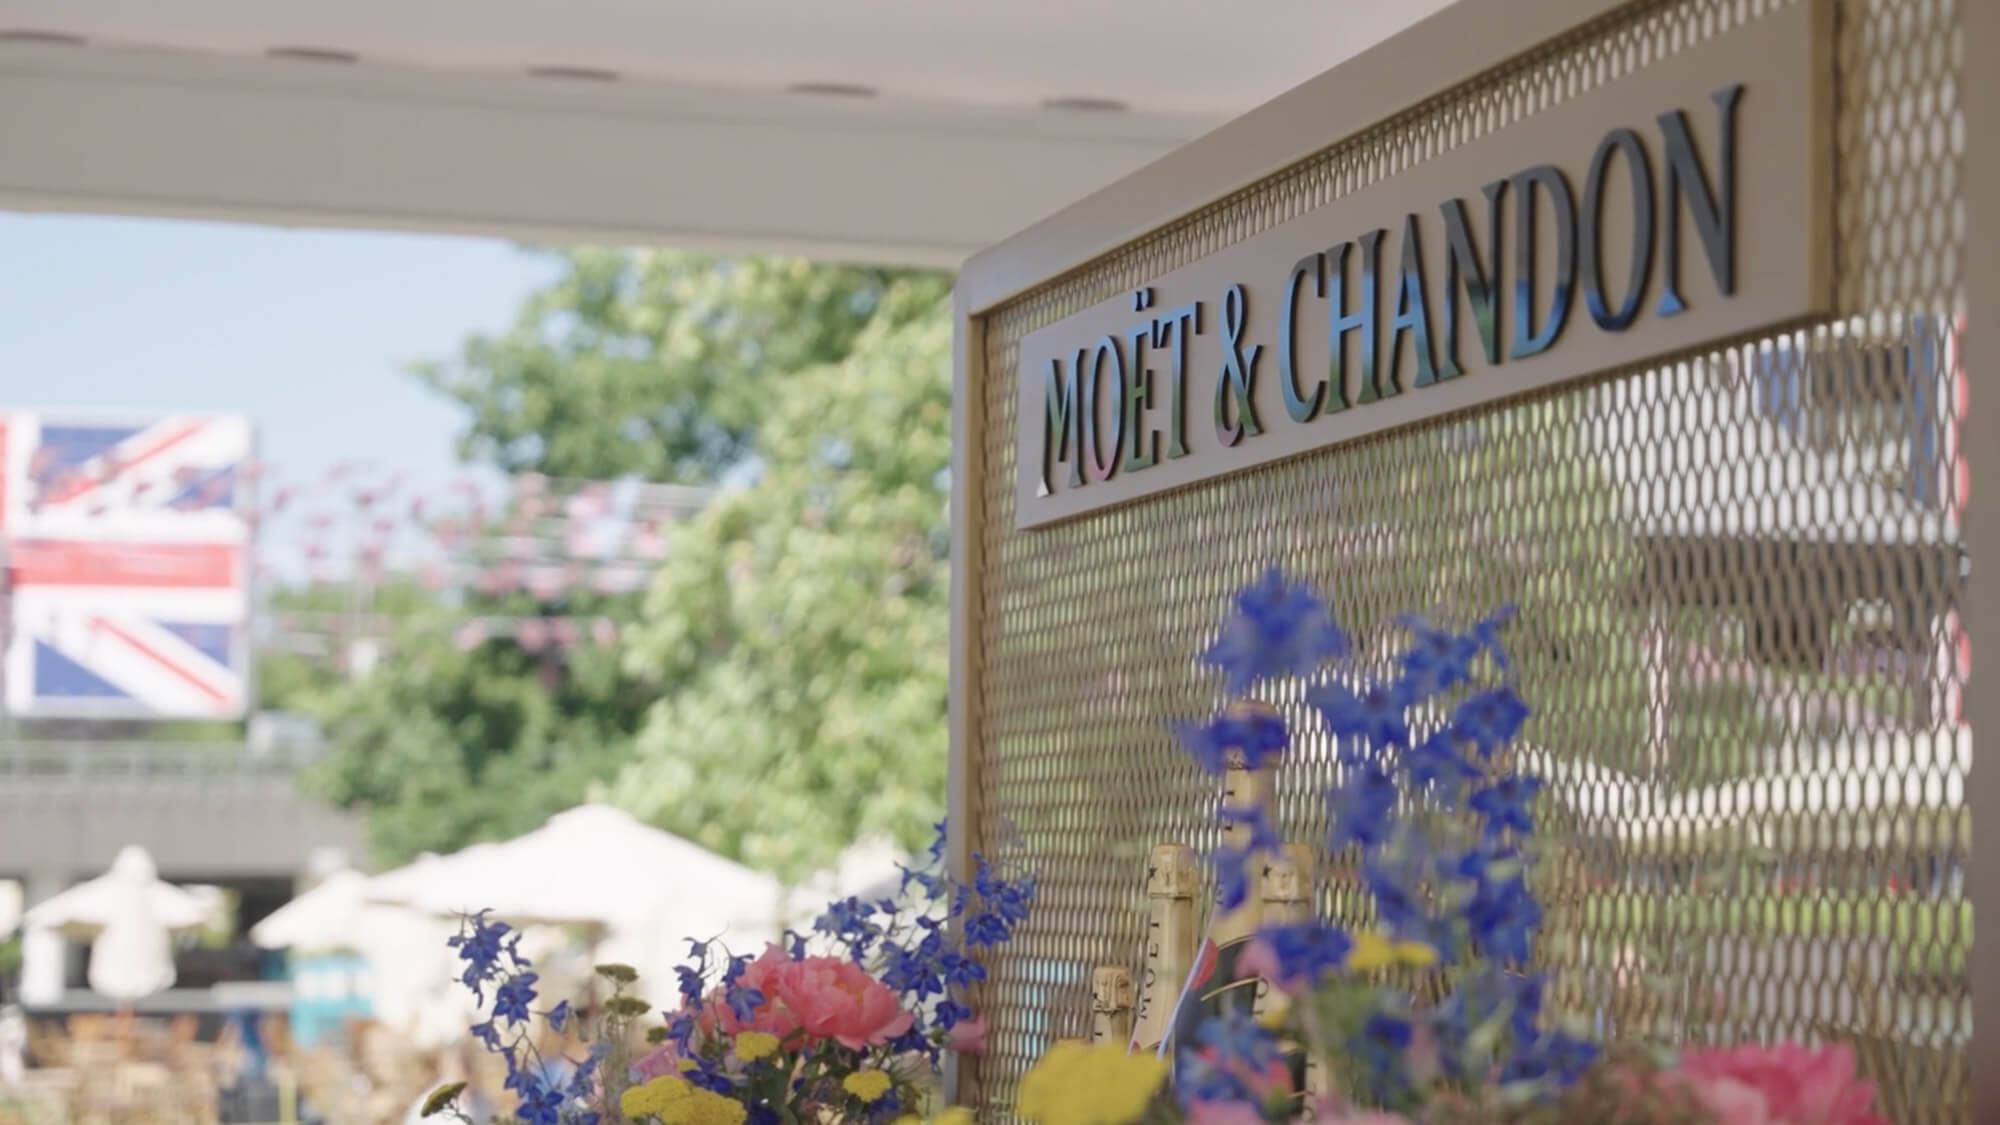 A Moet & Chandon champagne bar open for Race Day